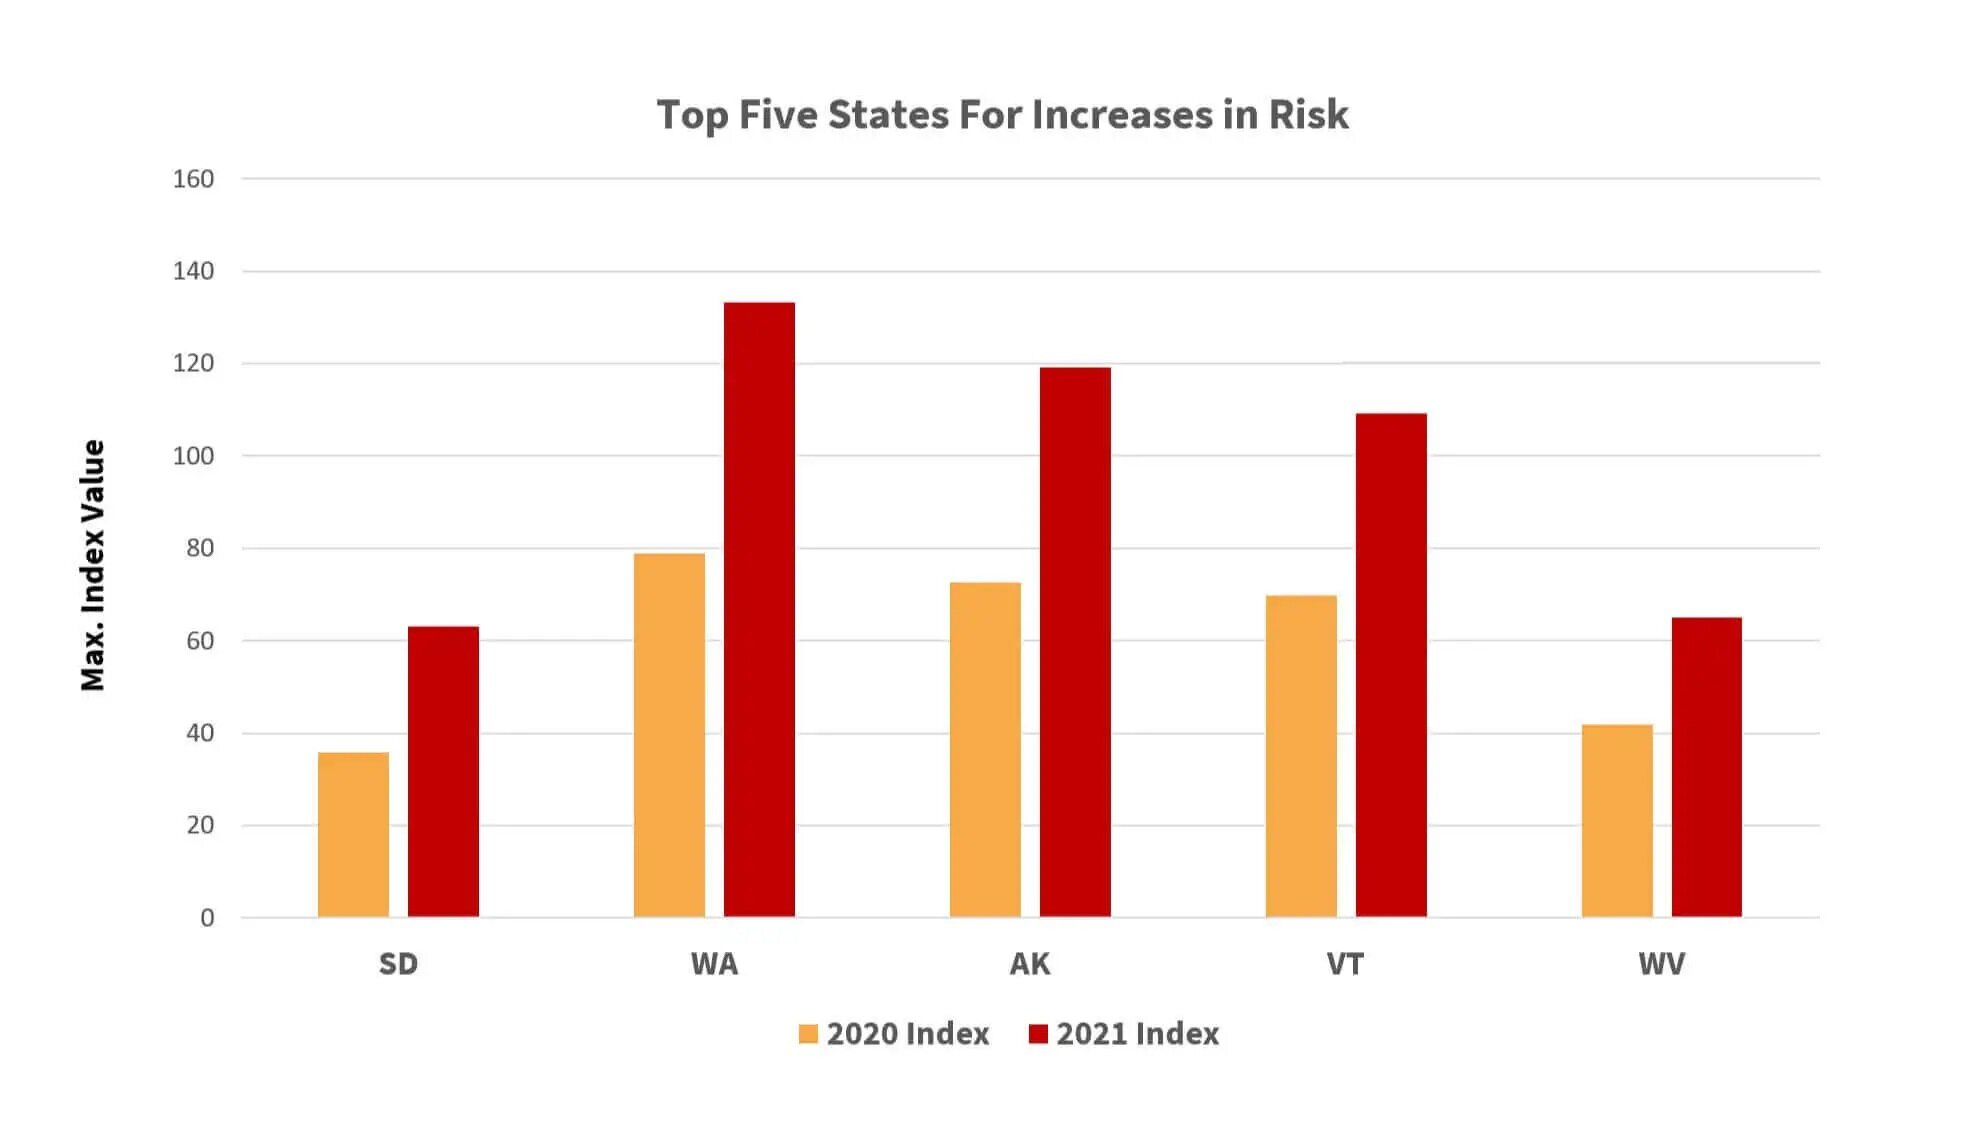 https://www.worldpropertyjournal.com/news-assets-2/Top_Five_States_for_Increases_in_Risk_v02-1.jpg